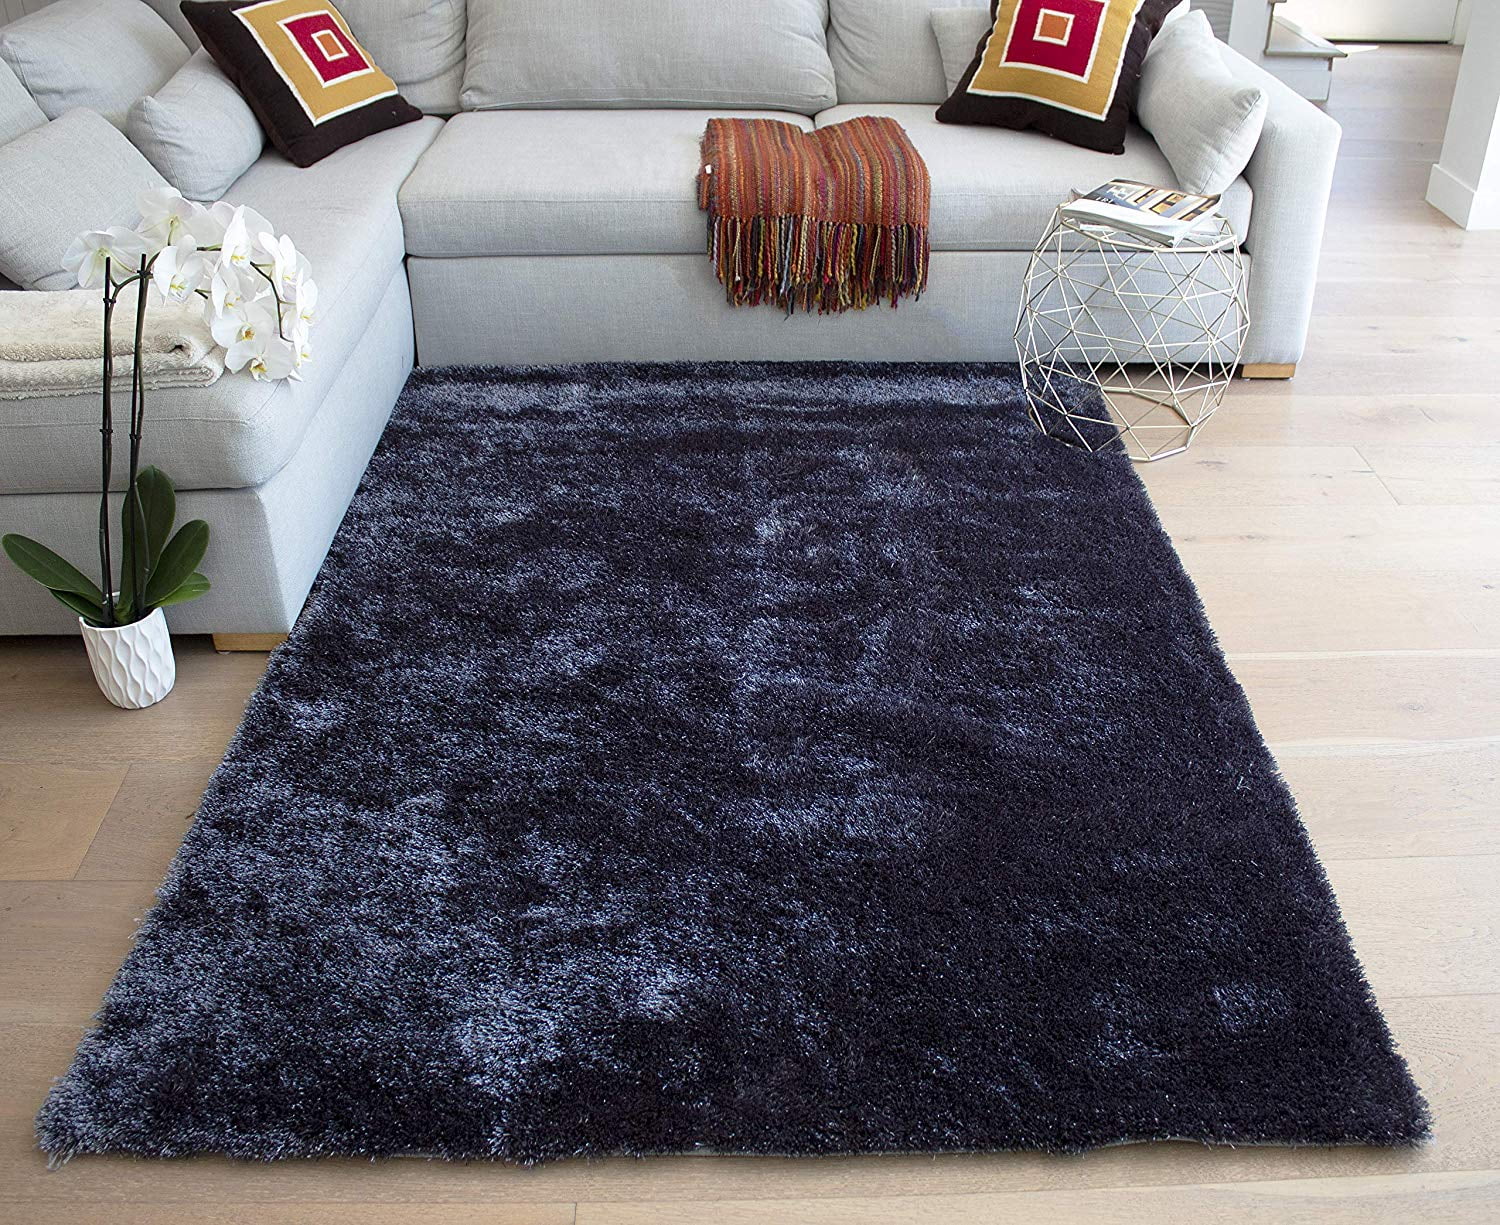 Soft Modern Area Shag Rug Contemporary Fluffy Long Pile Thick Carpet Large Mat A 